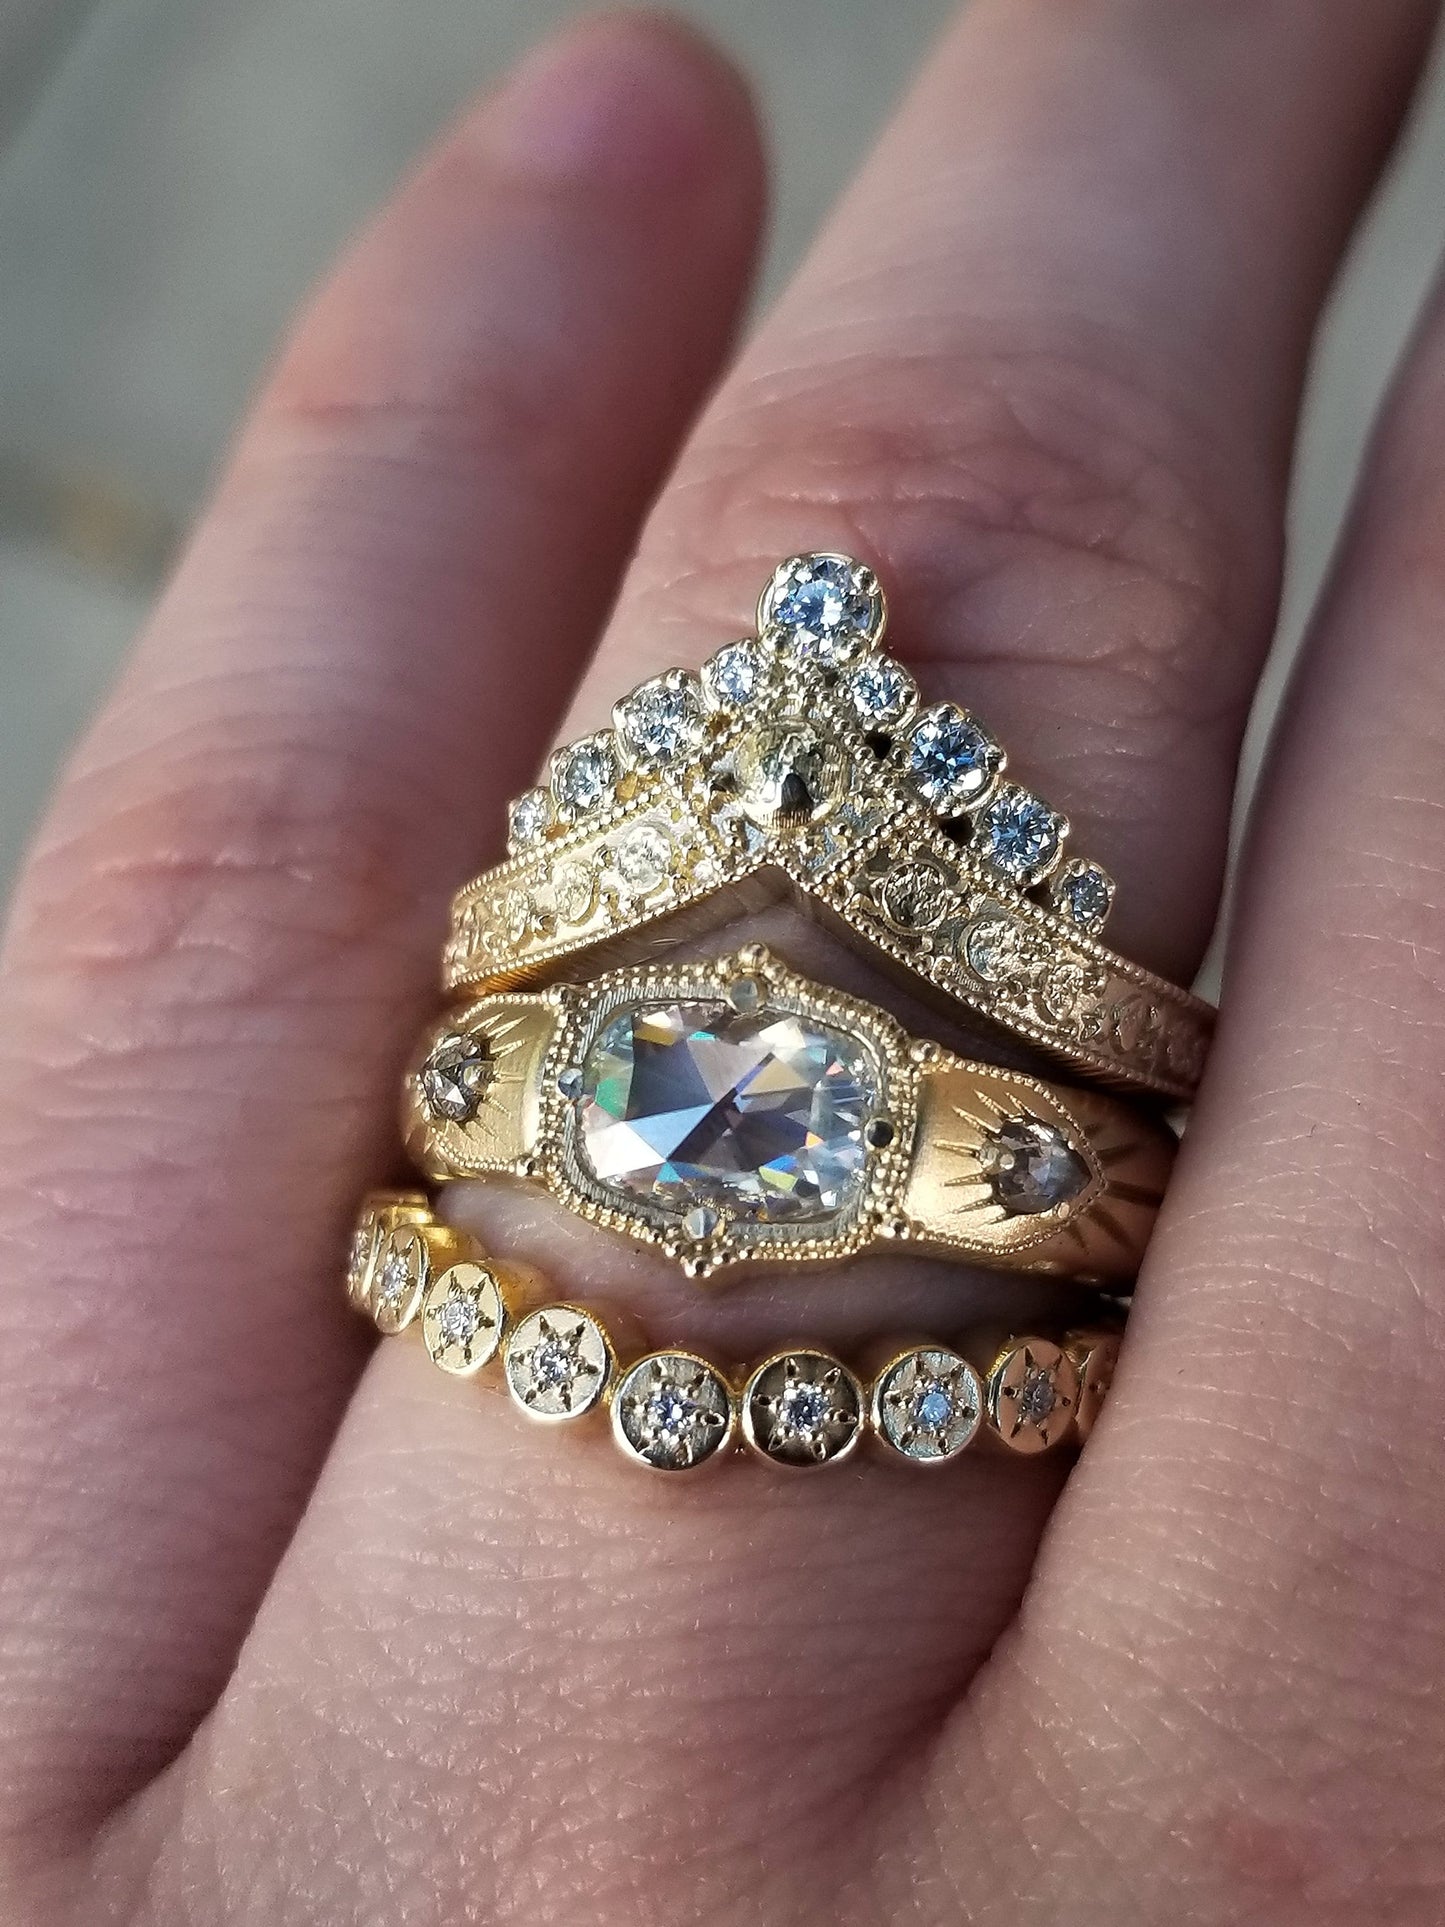 Diamond Luna Diadem Chevron Wedding Band with Moon Phases and Full Moon and Stardust - Stacking Celestial Unique Gold Ring